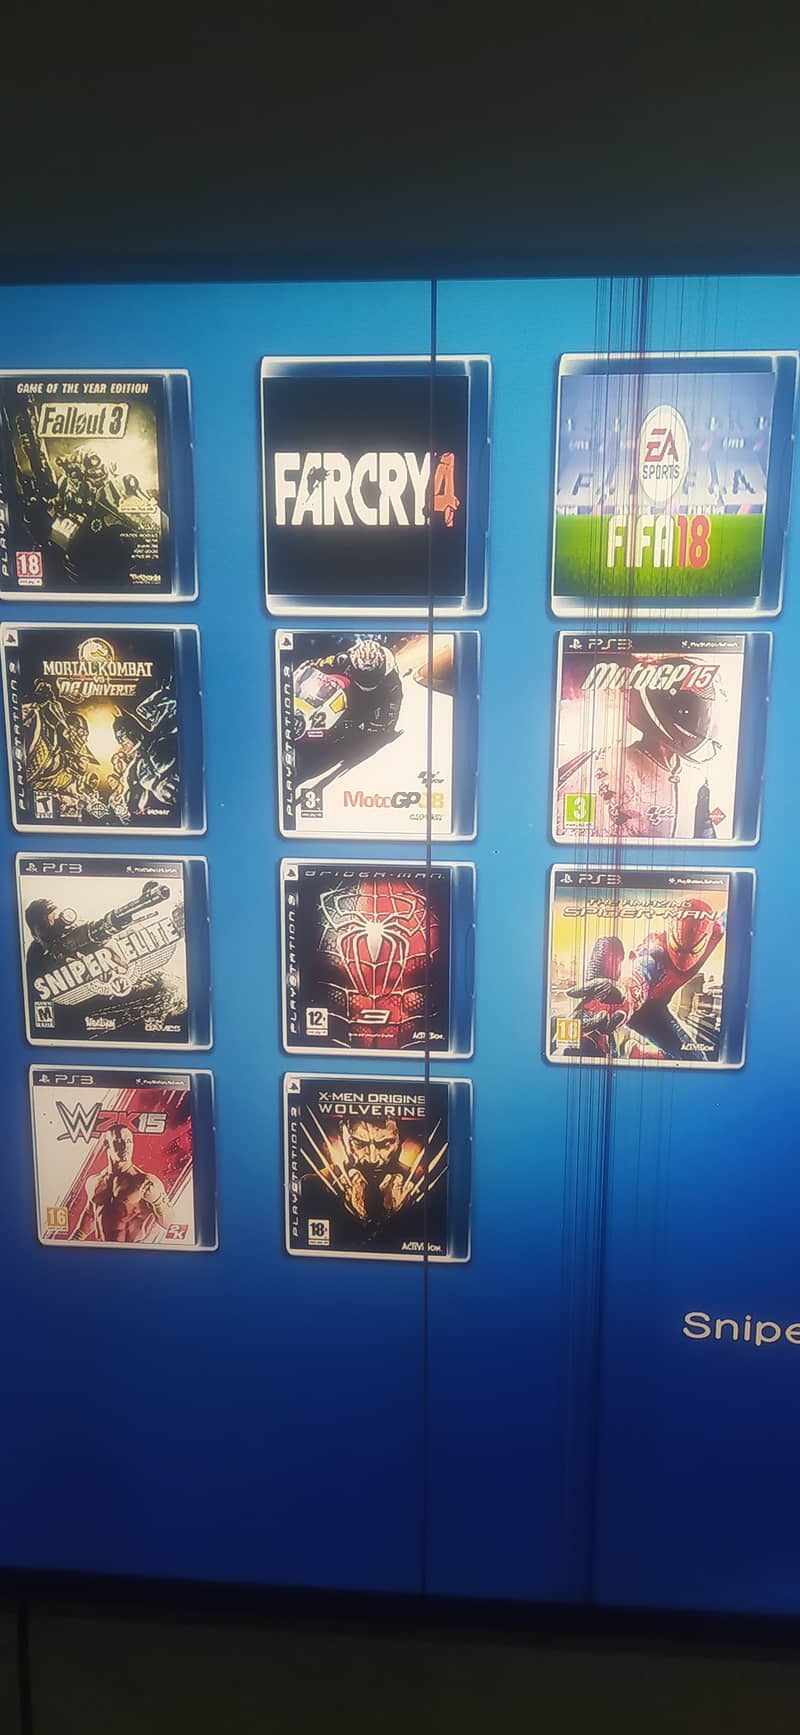 PS3 slim jailbreak 2 pieces available with 100 games 2